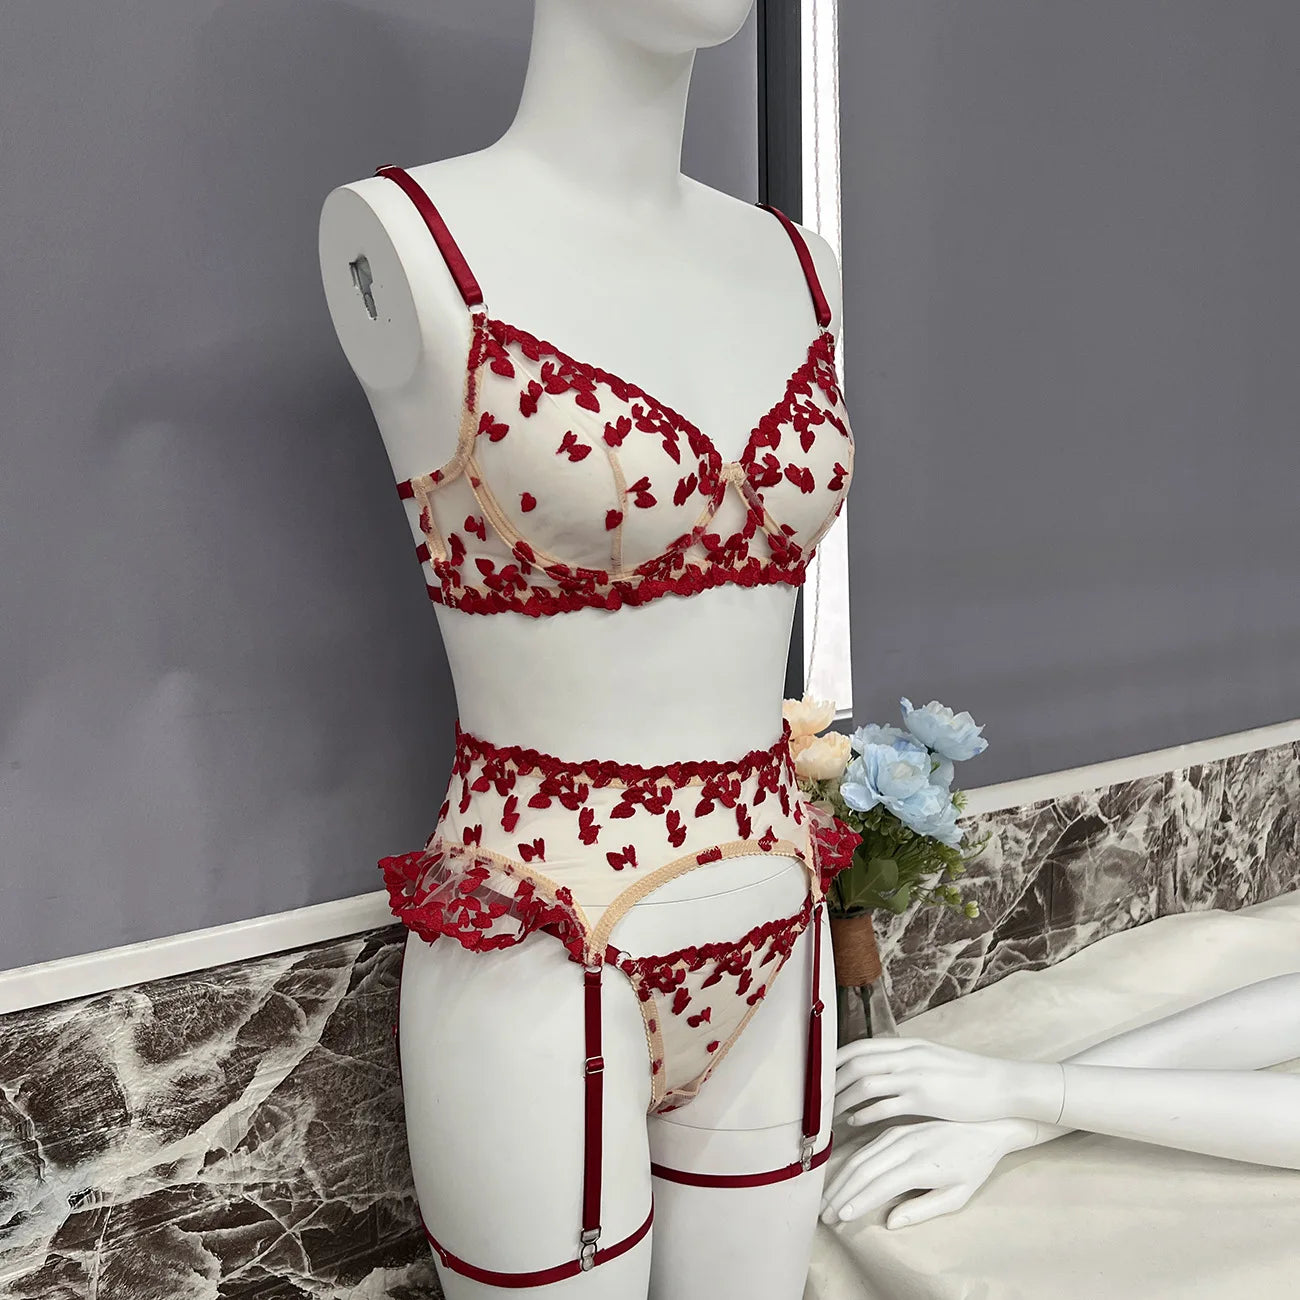 Heart Lingerie Sheer Lace Embroidery Sensual Bra + Panty Underwear Set 4-Piece Ruffle Delicate Sexy Outfits - Sellinashop